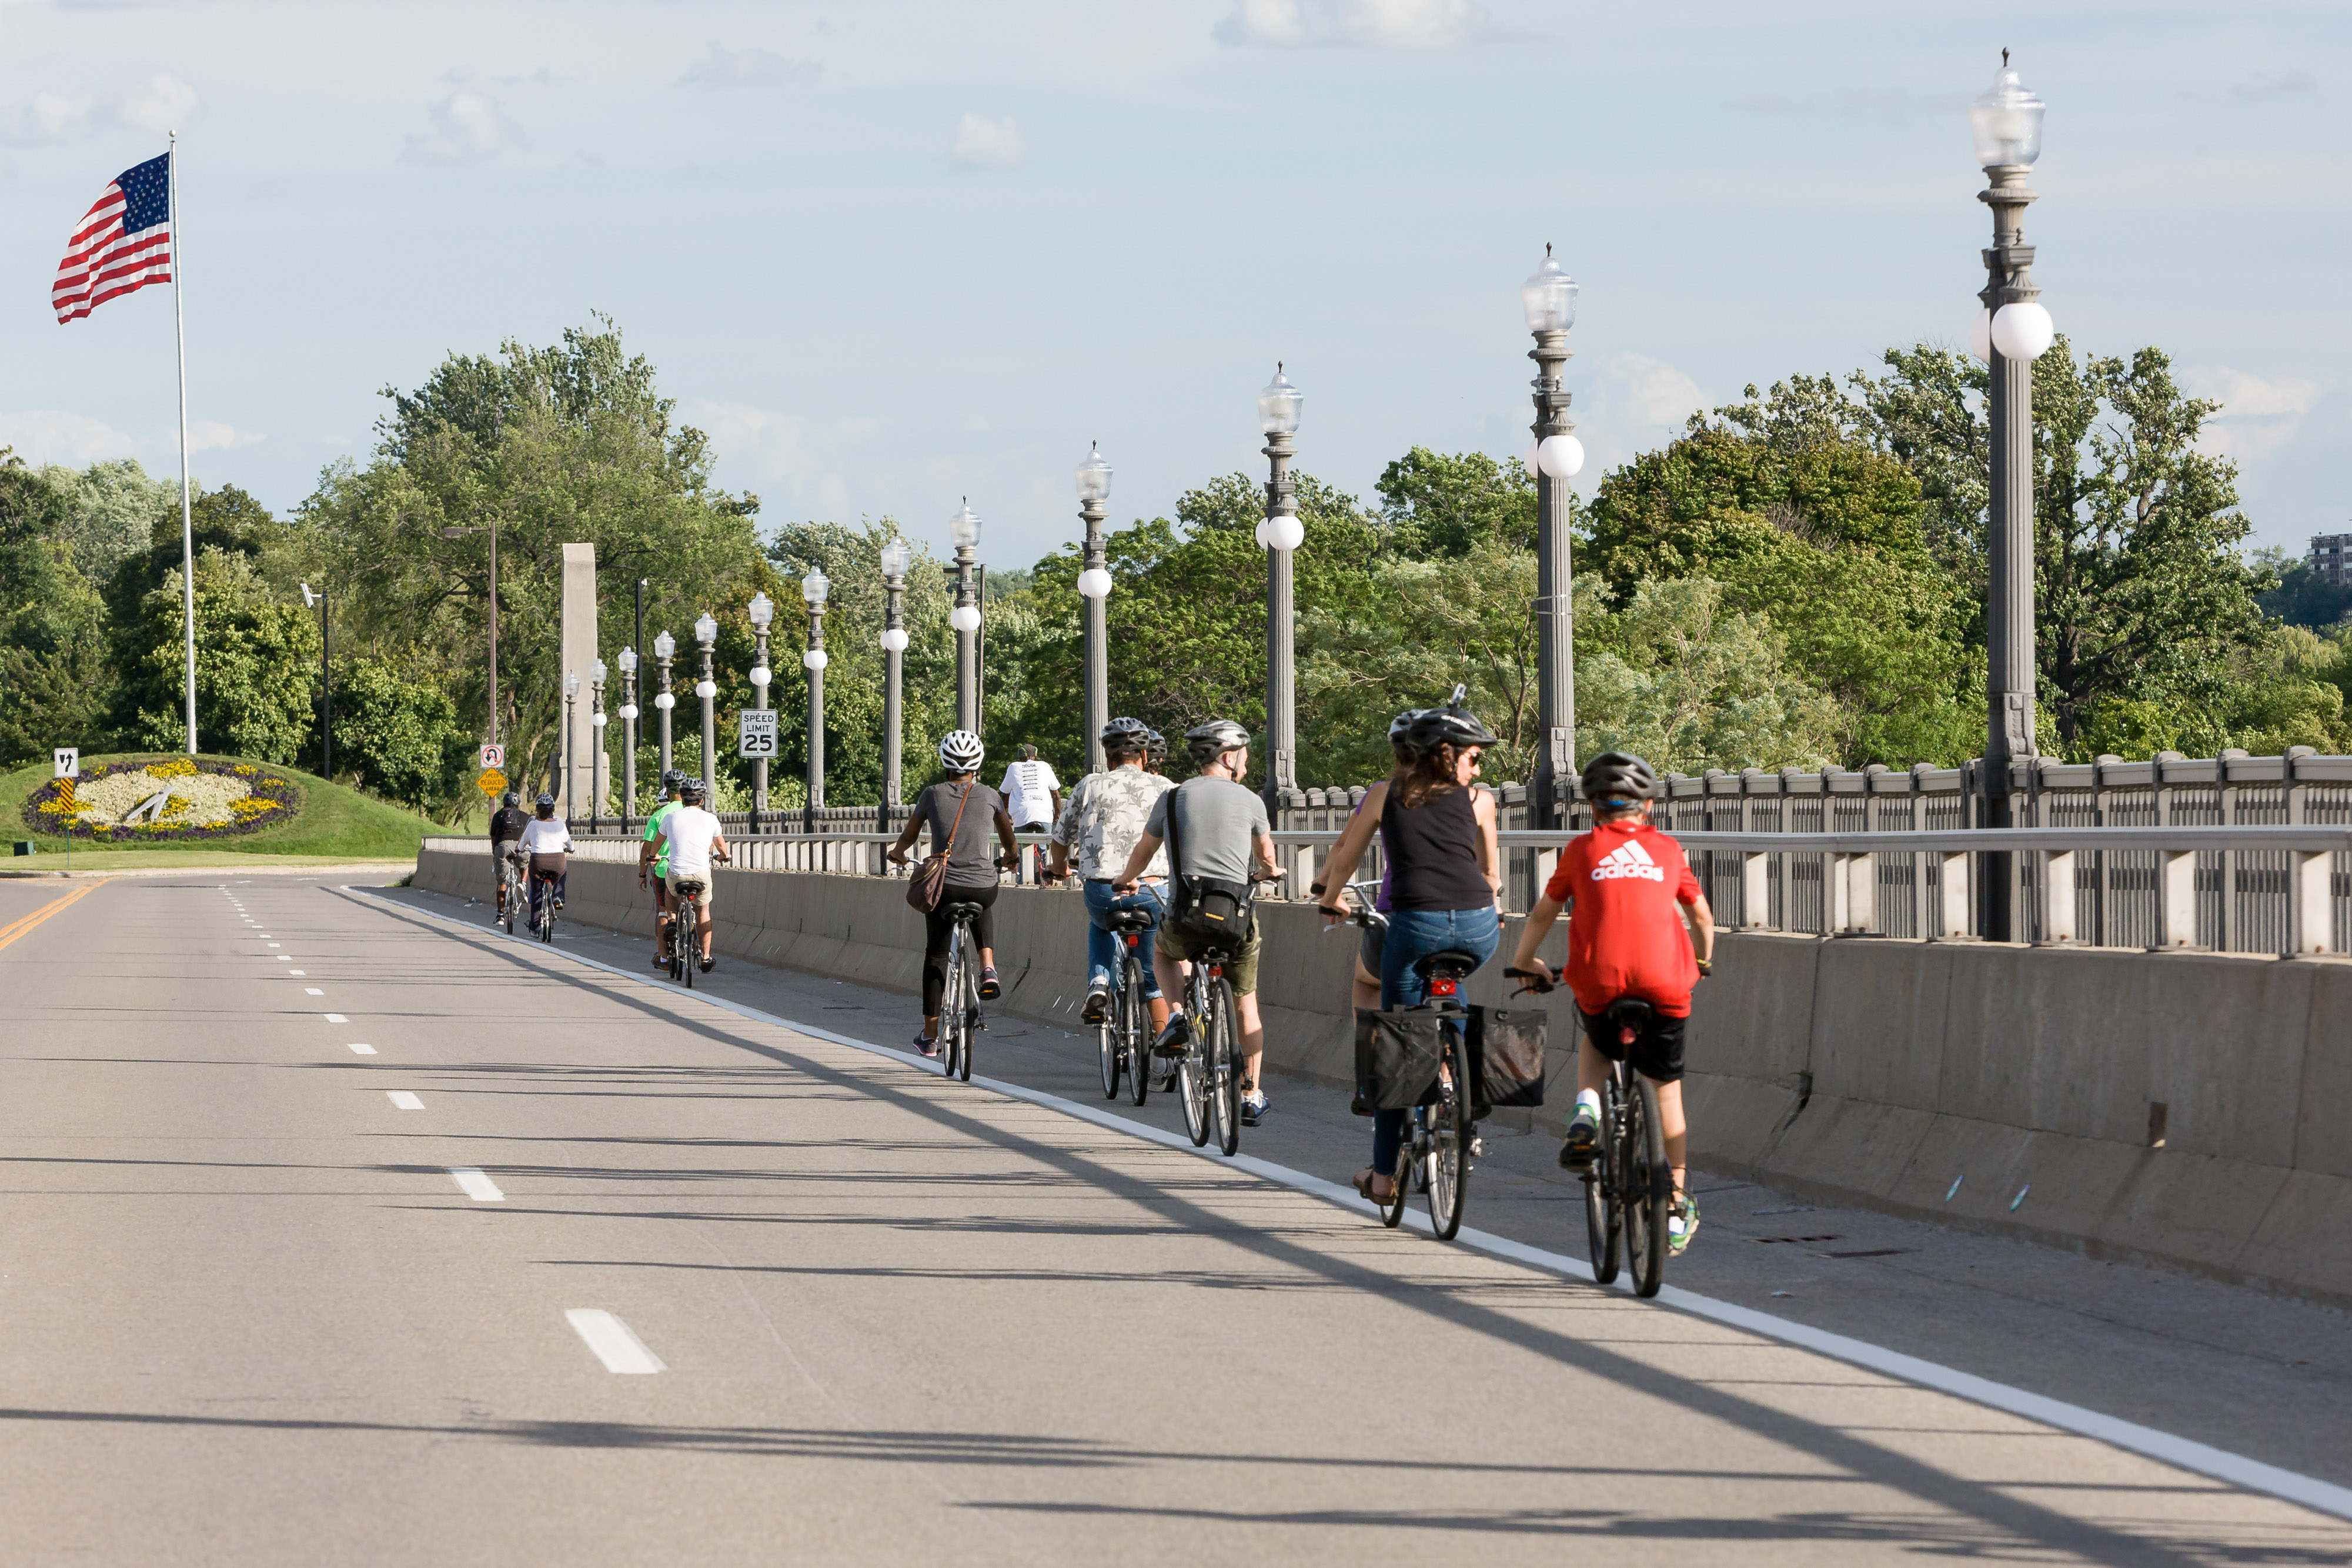 A group of bicyclists cross a bridge in Detroit, MI.